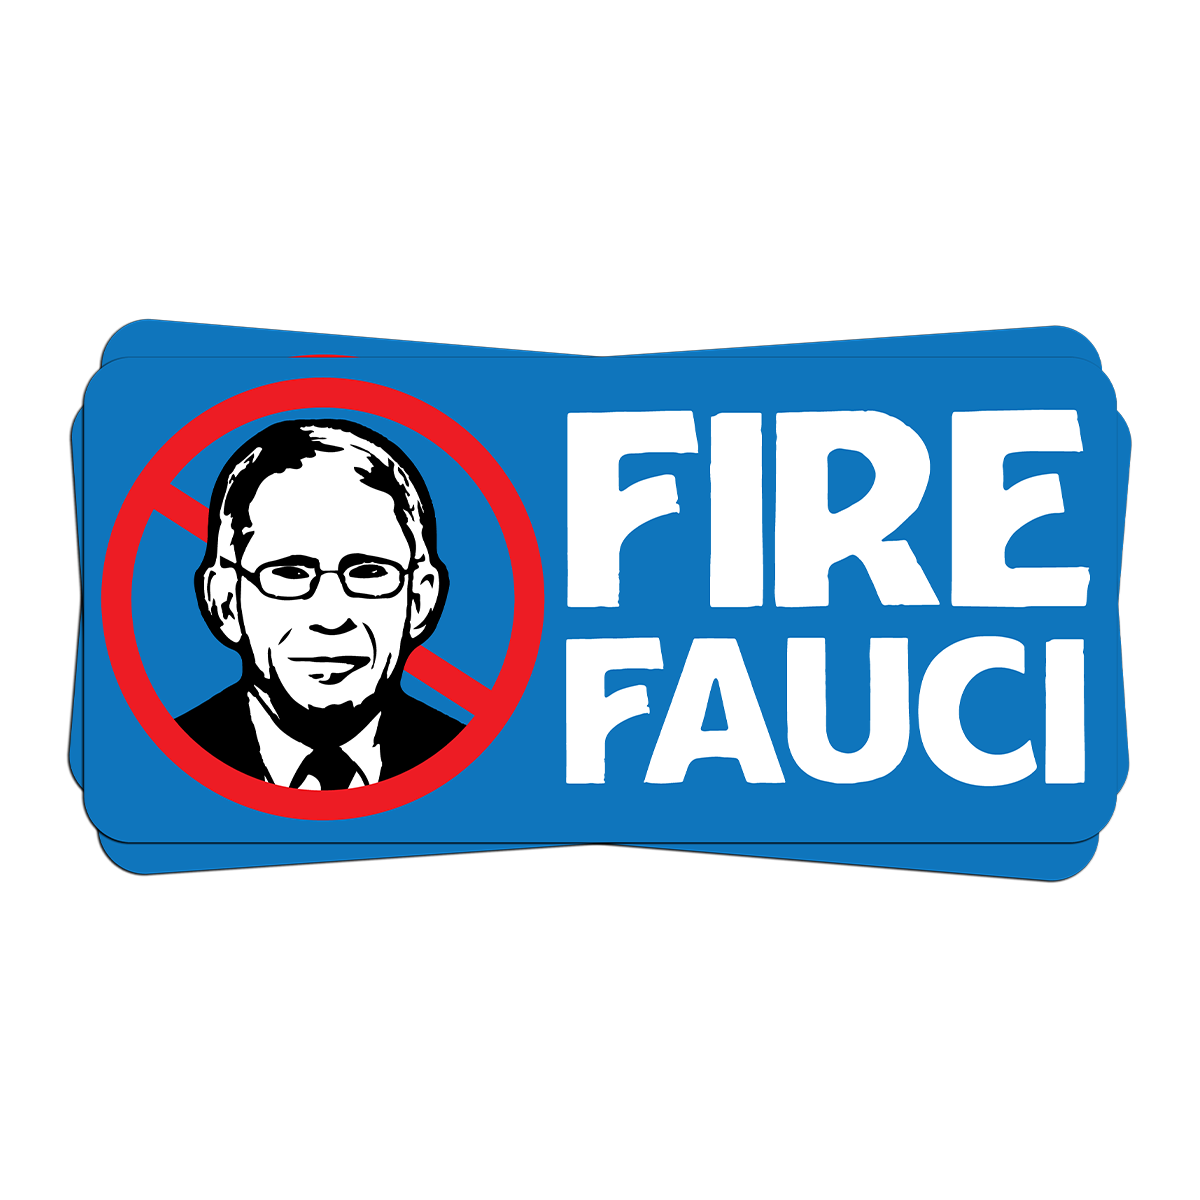 "Fire Fauci" - Decal